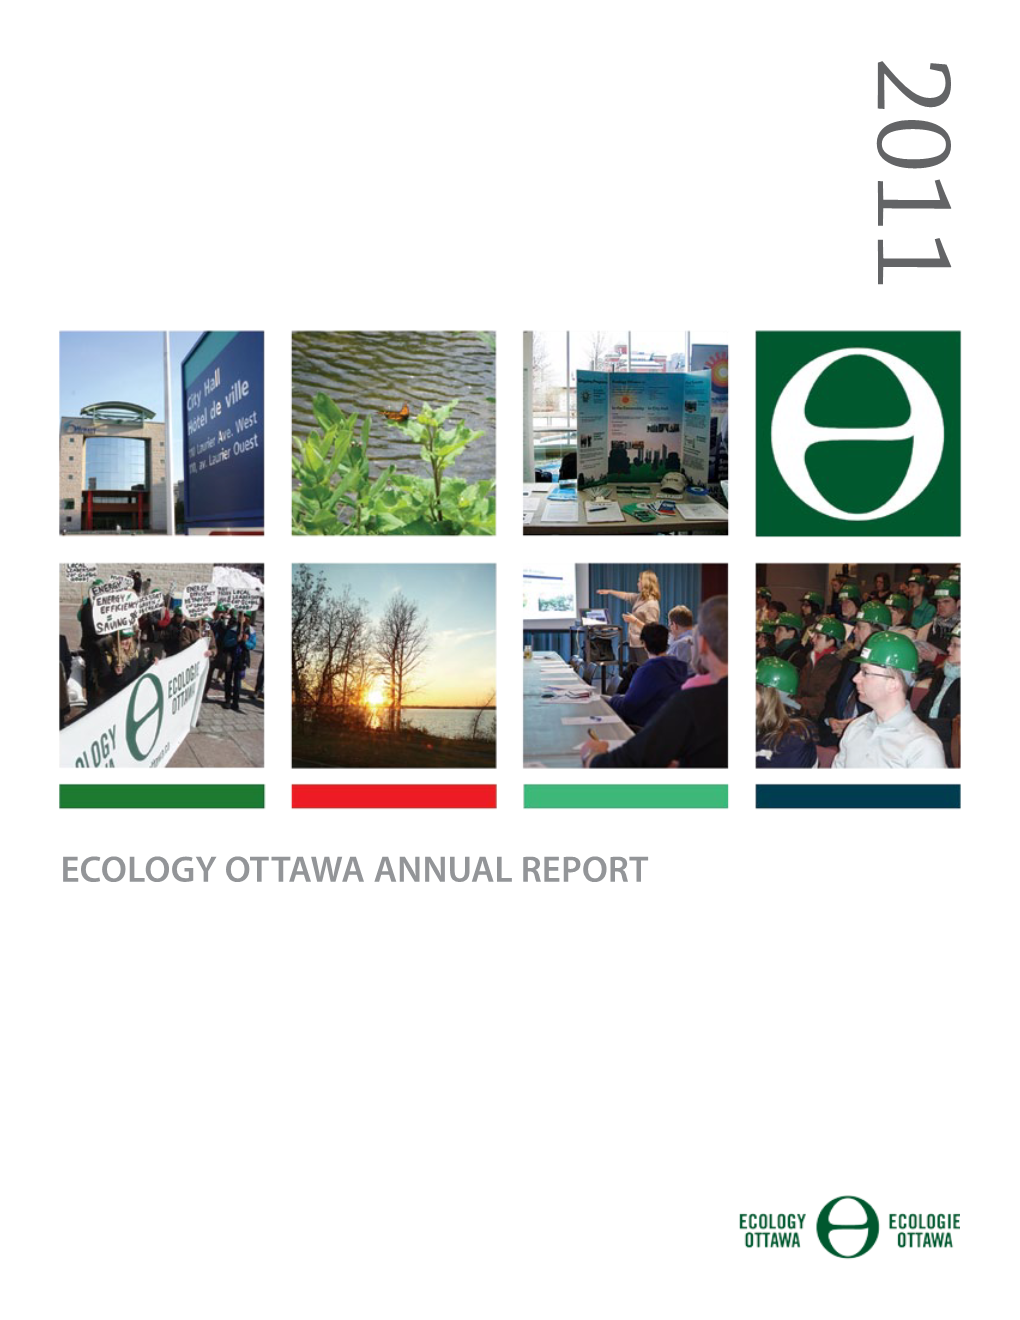 ECOLOGY OTTAWA ANNUAL REPORT 2011 Annual Report